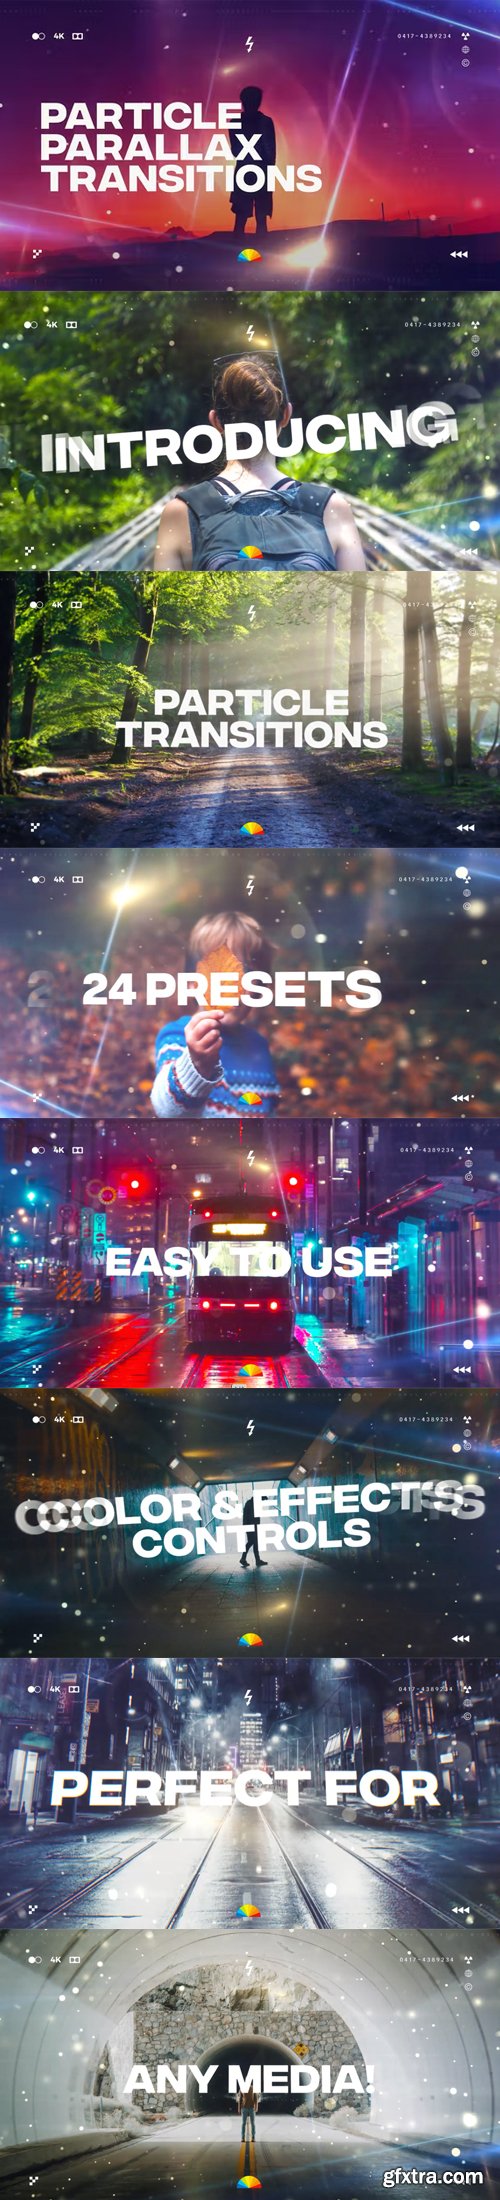 Videohive - Parallax Particle Transitions - 38886214